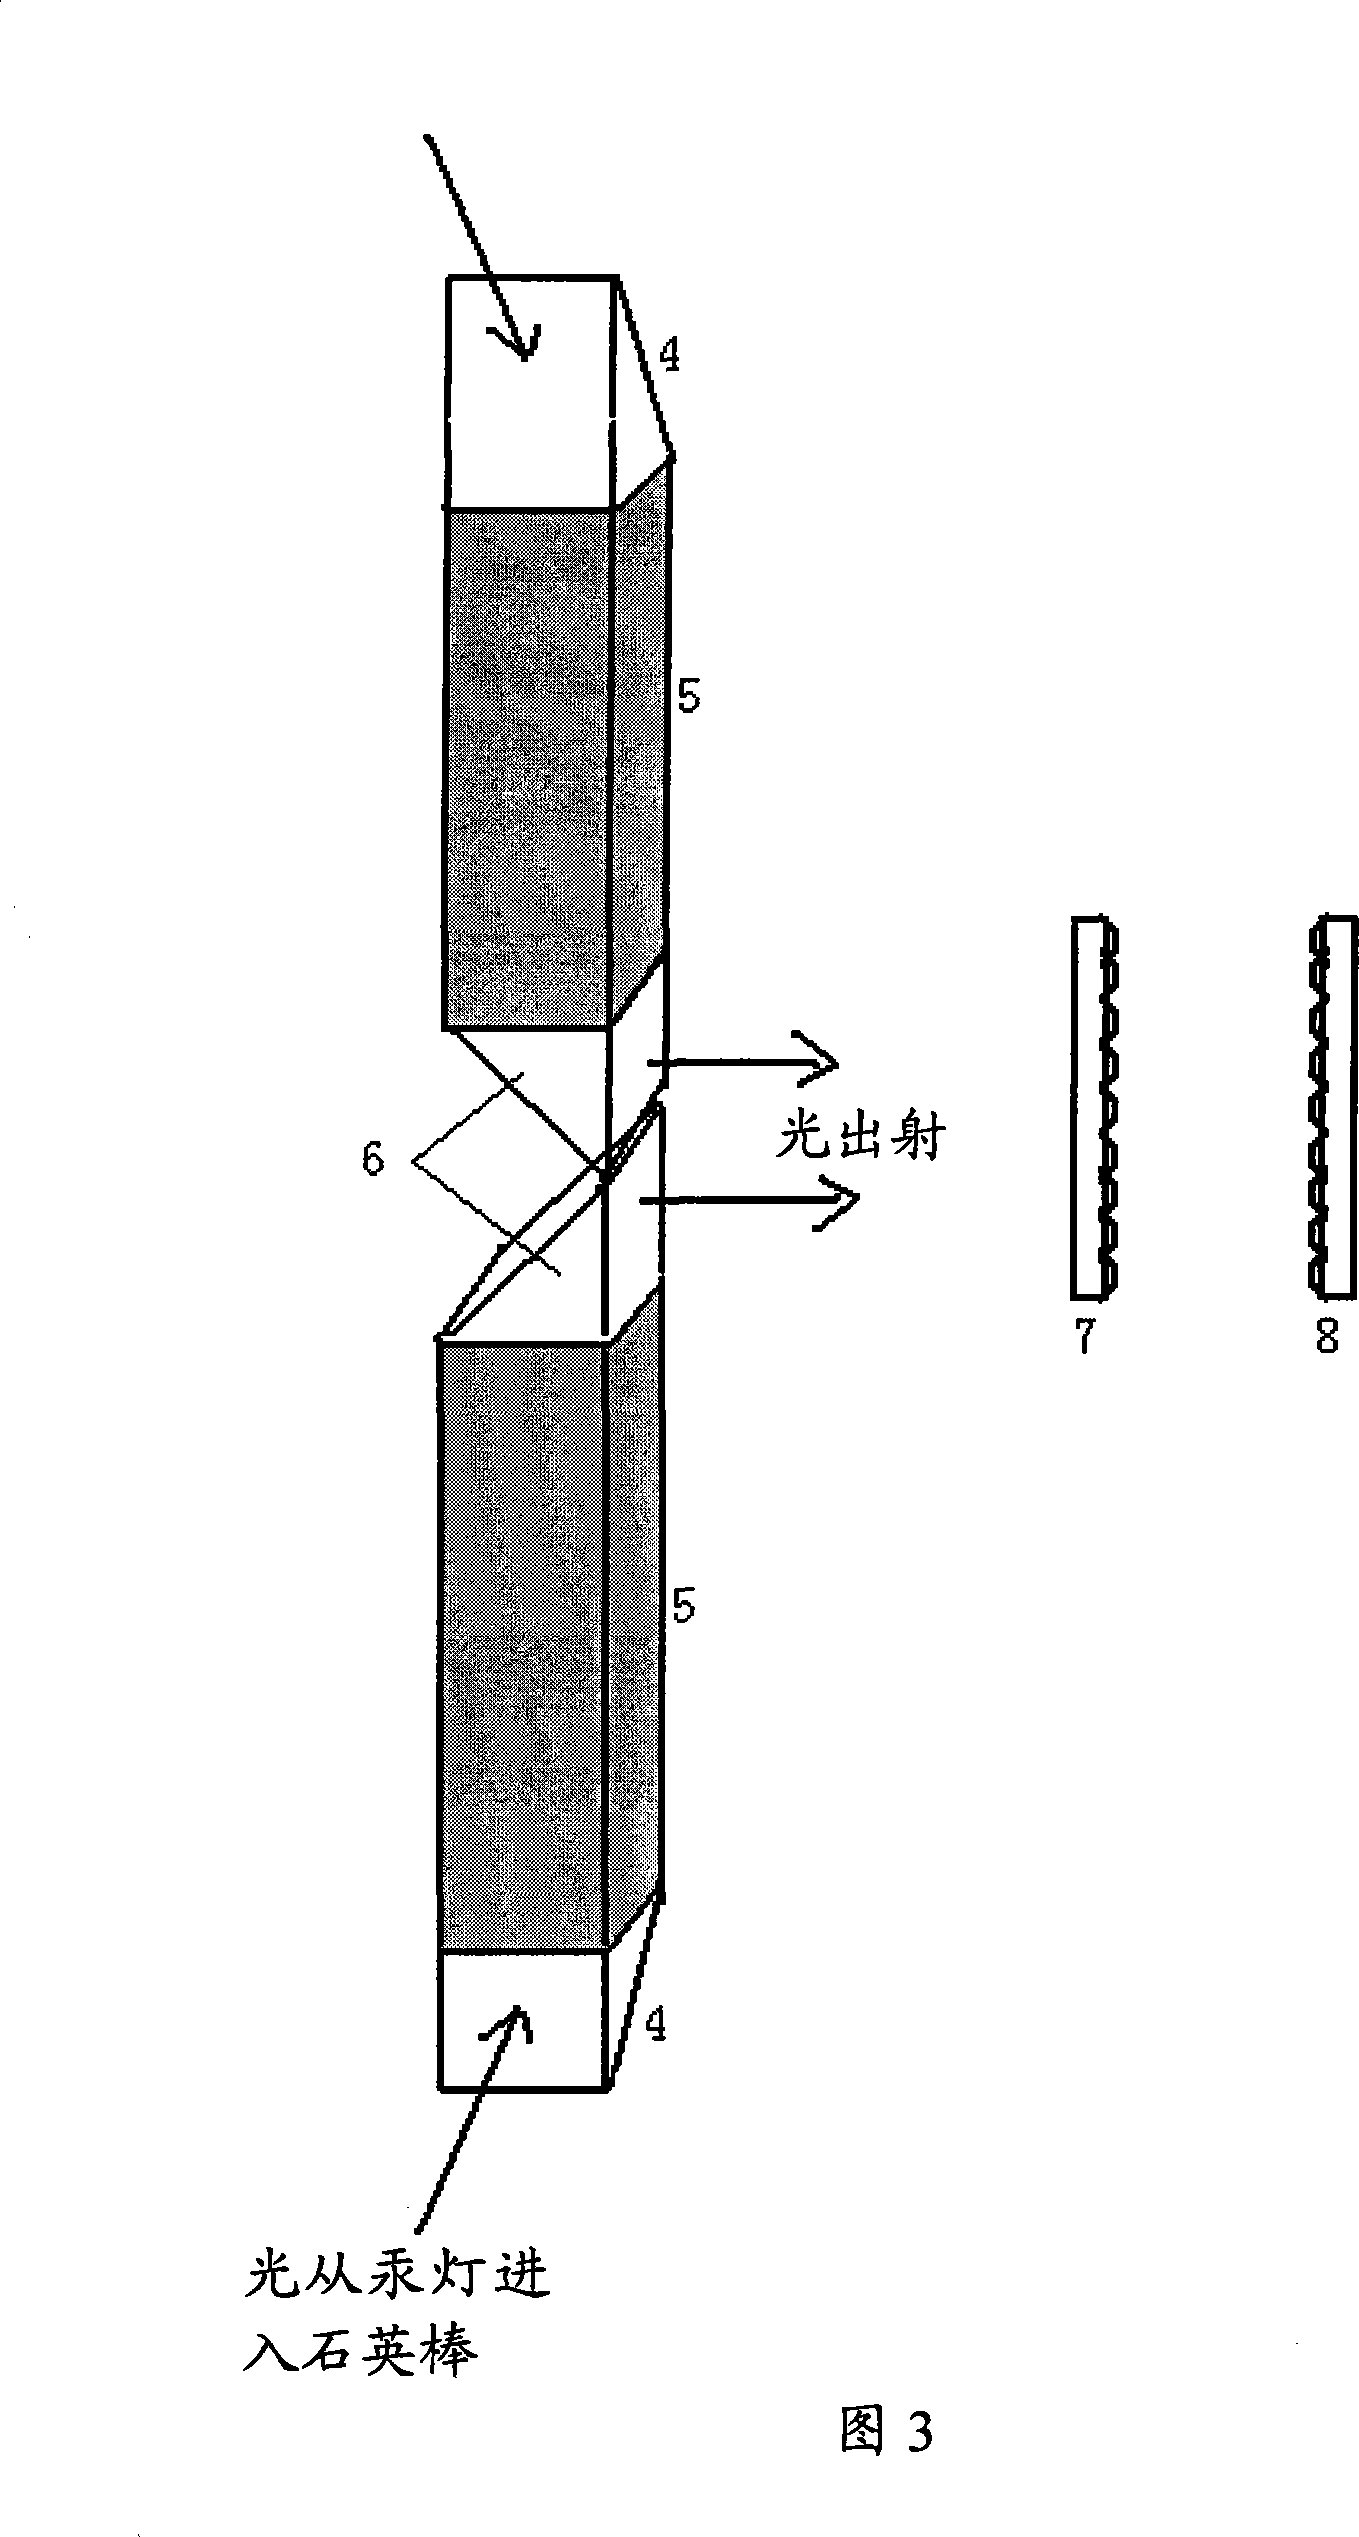 Light optics system for microlithography